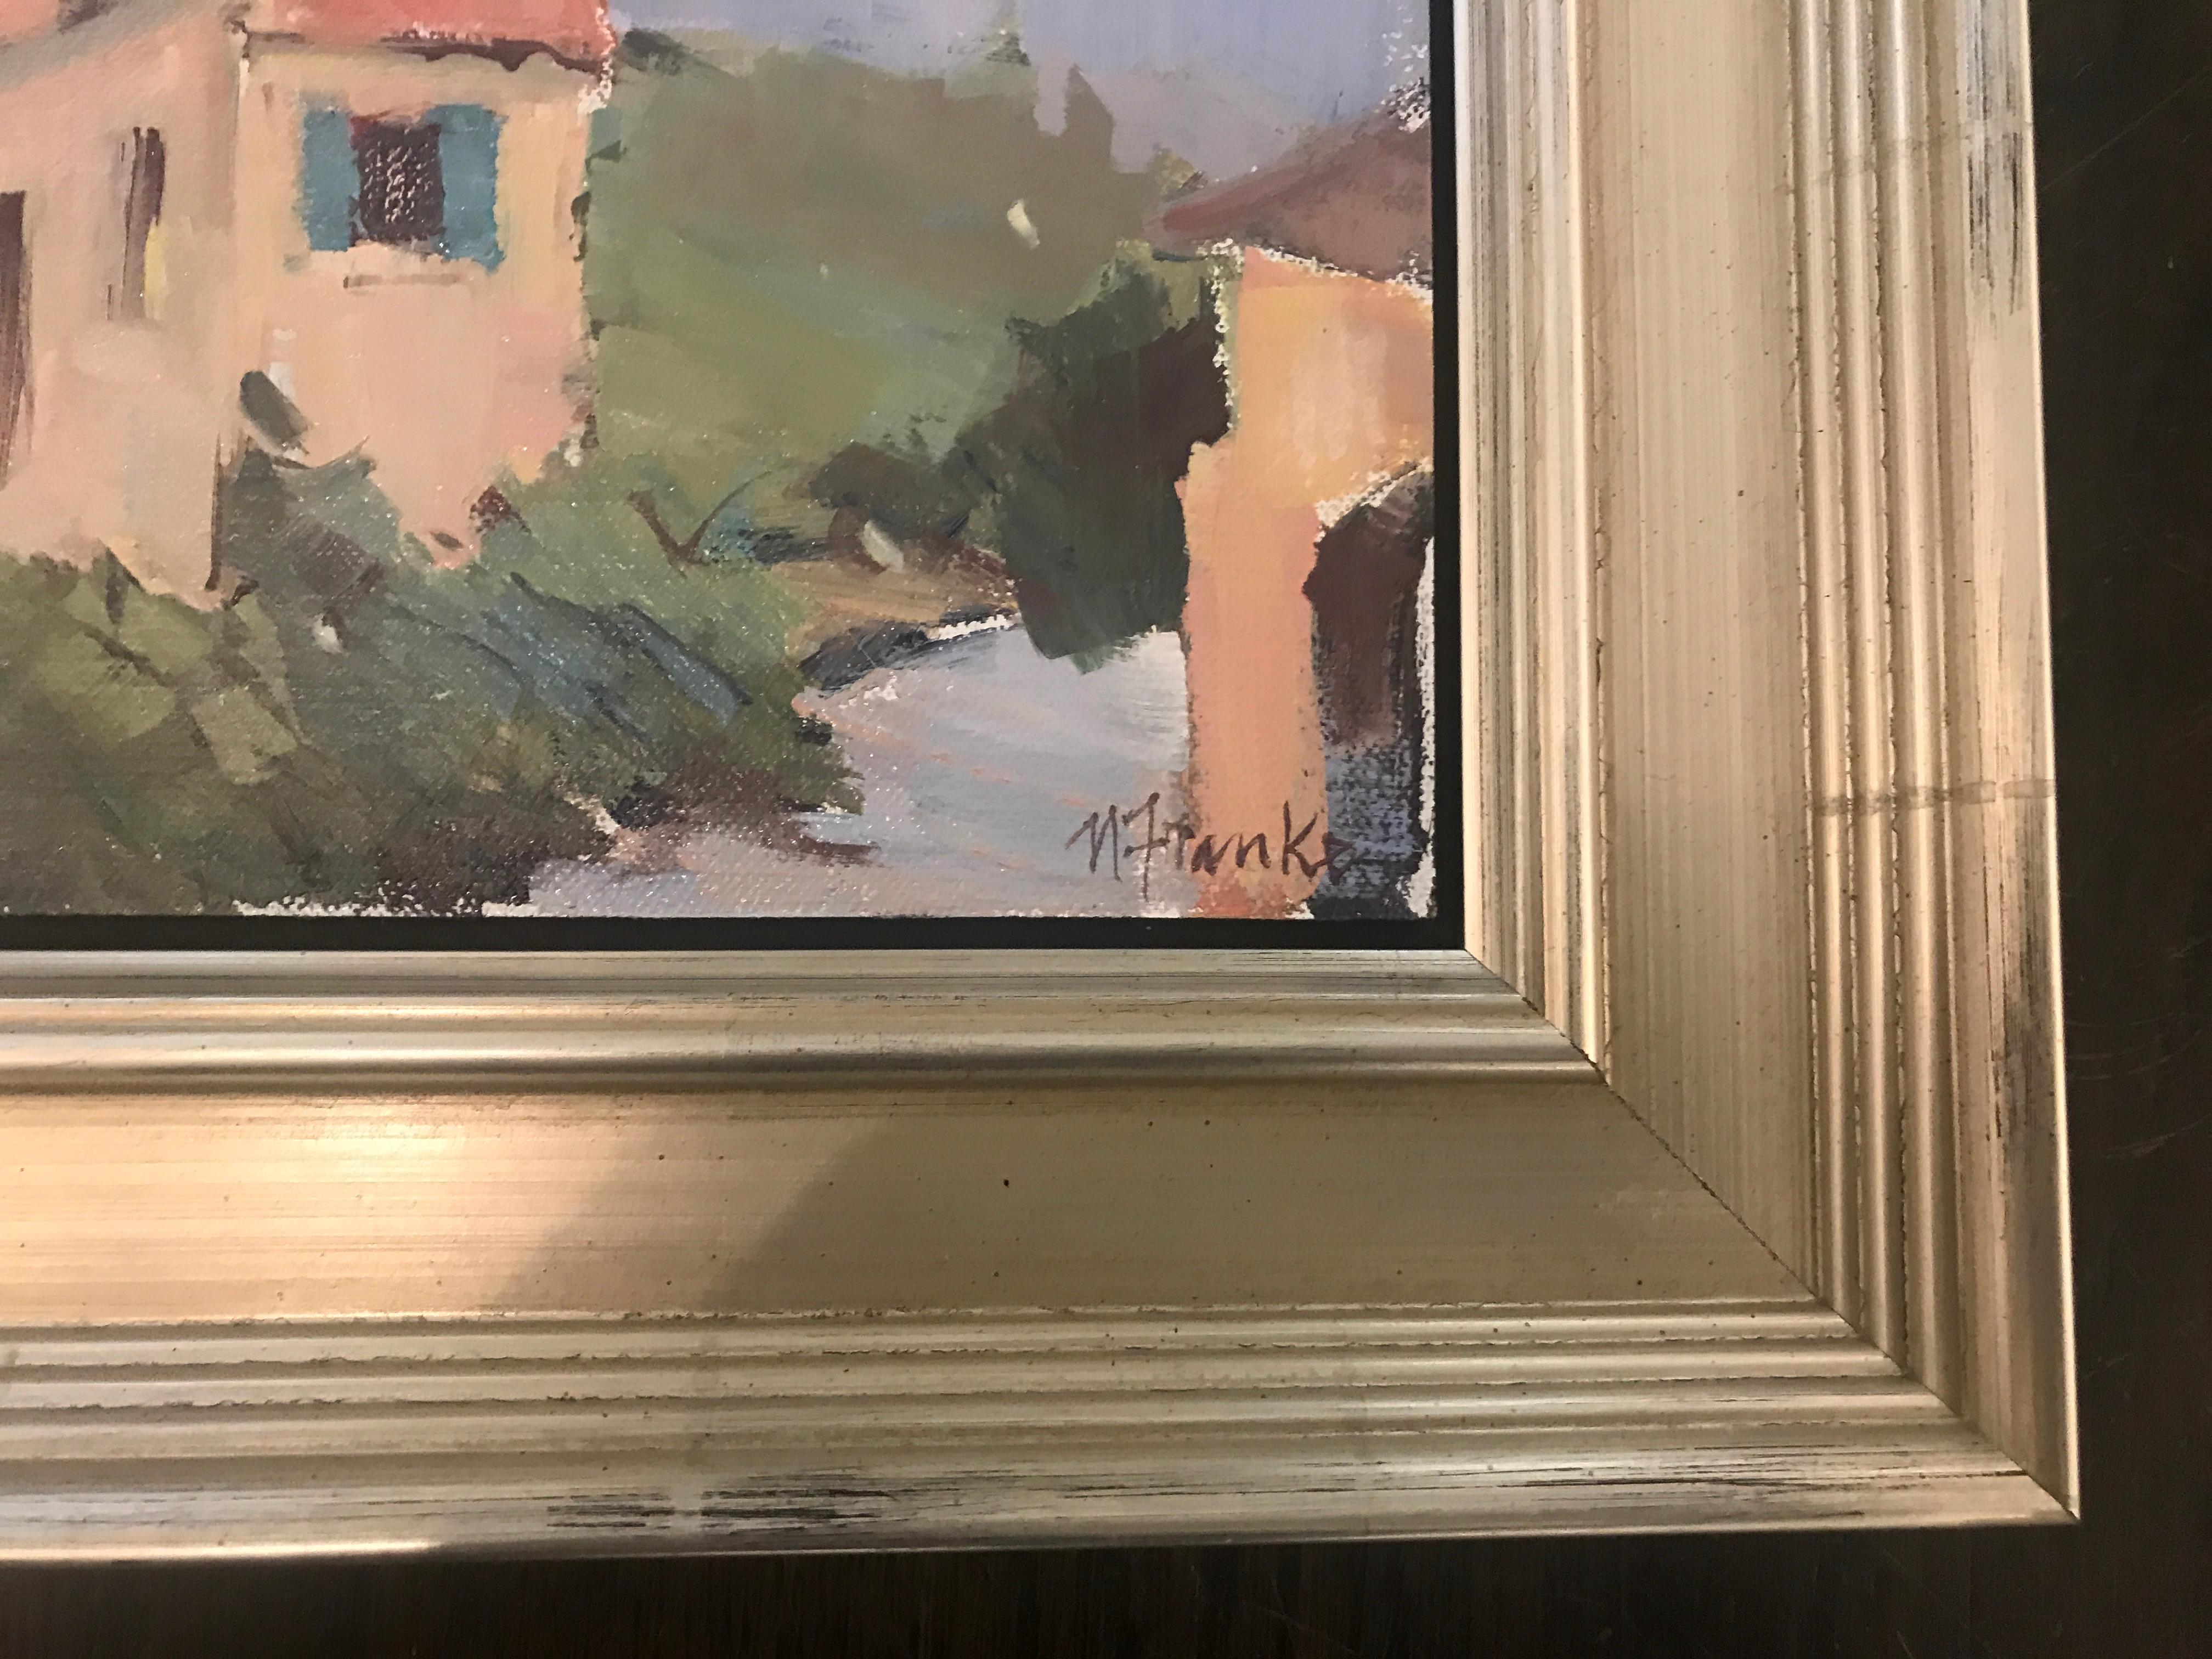 This piece is framed in a traditional warm silver frame.  The framed size is 10.5 x 10.5

Nancy Franke began painting as a child in Pennsylvania, studying under Glenn Brougher, a noted watercolorist. She majored in Fine Arts at Wilson College and